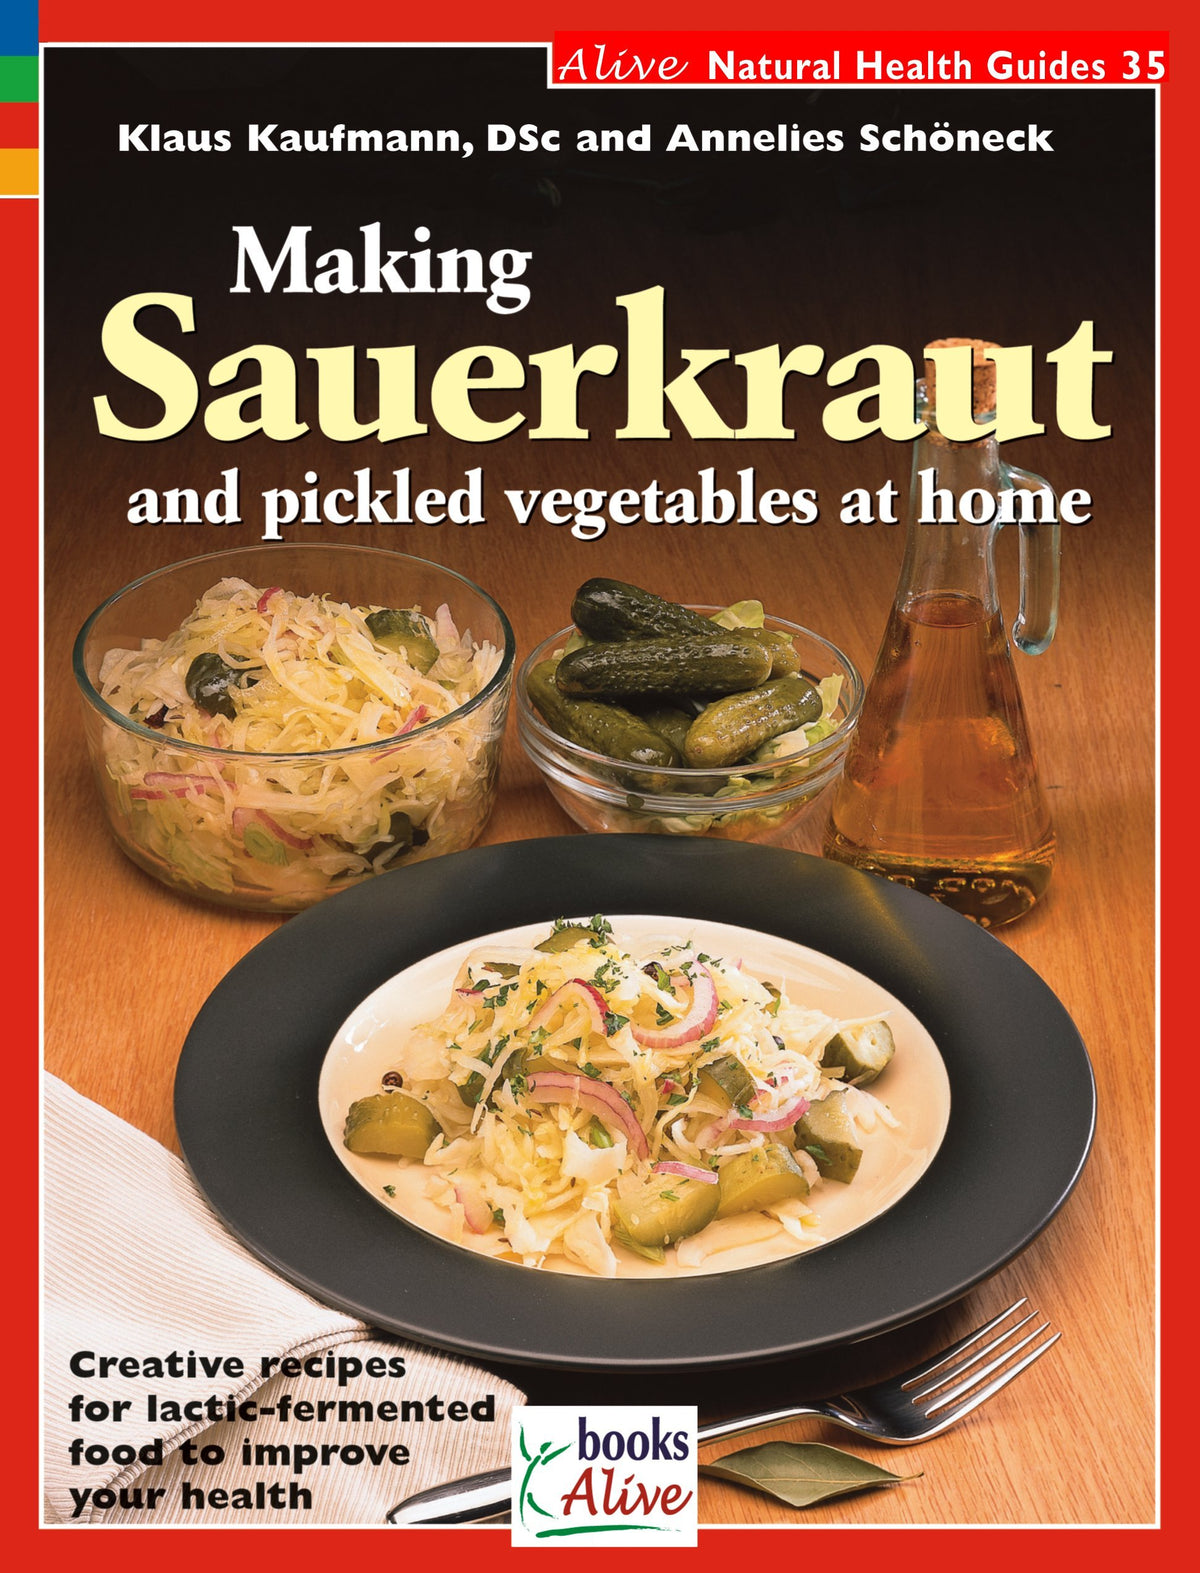 Making Sauerkraut and Pickled Vegetables at Home by Klaus Kaufmann